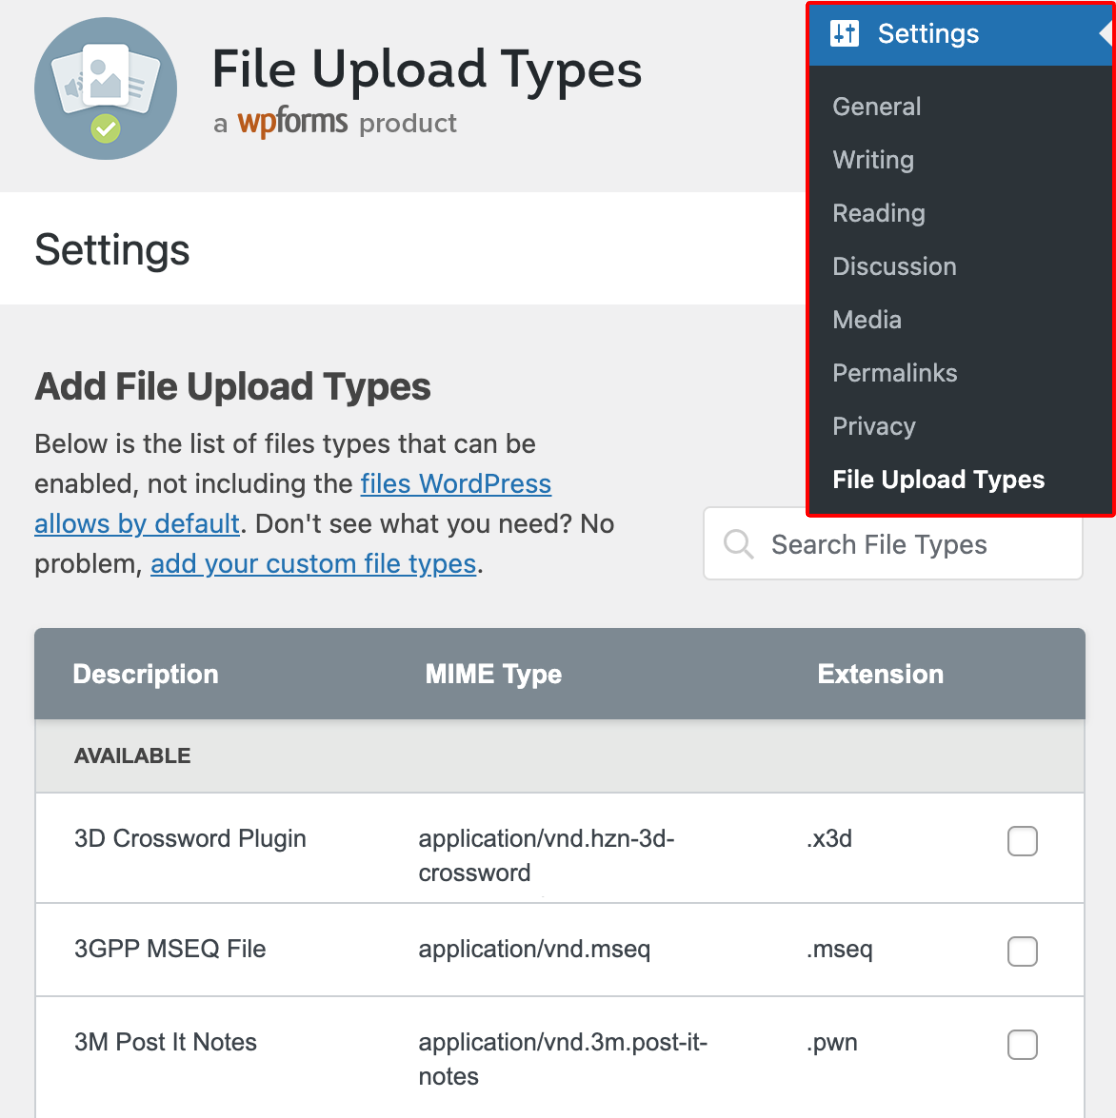 File upload types page